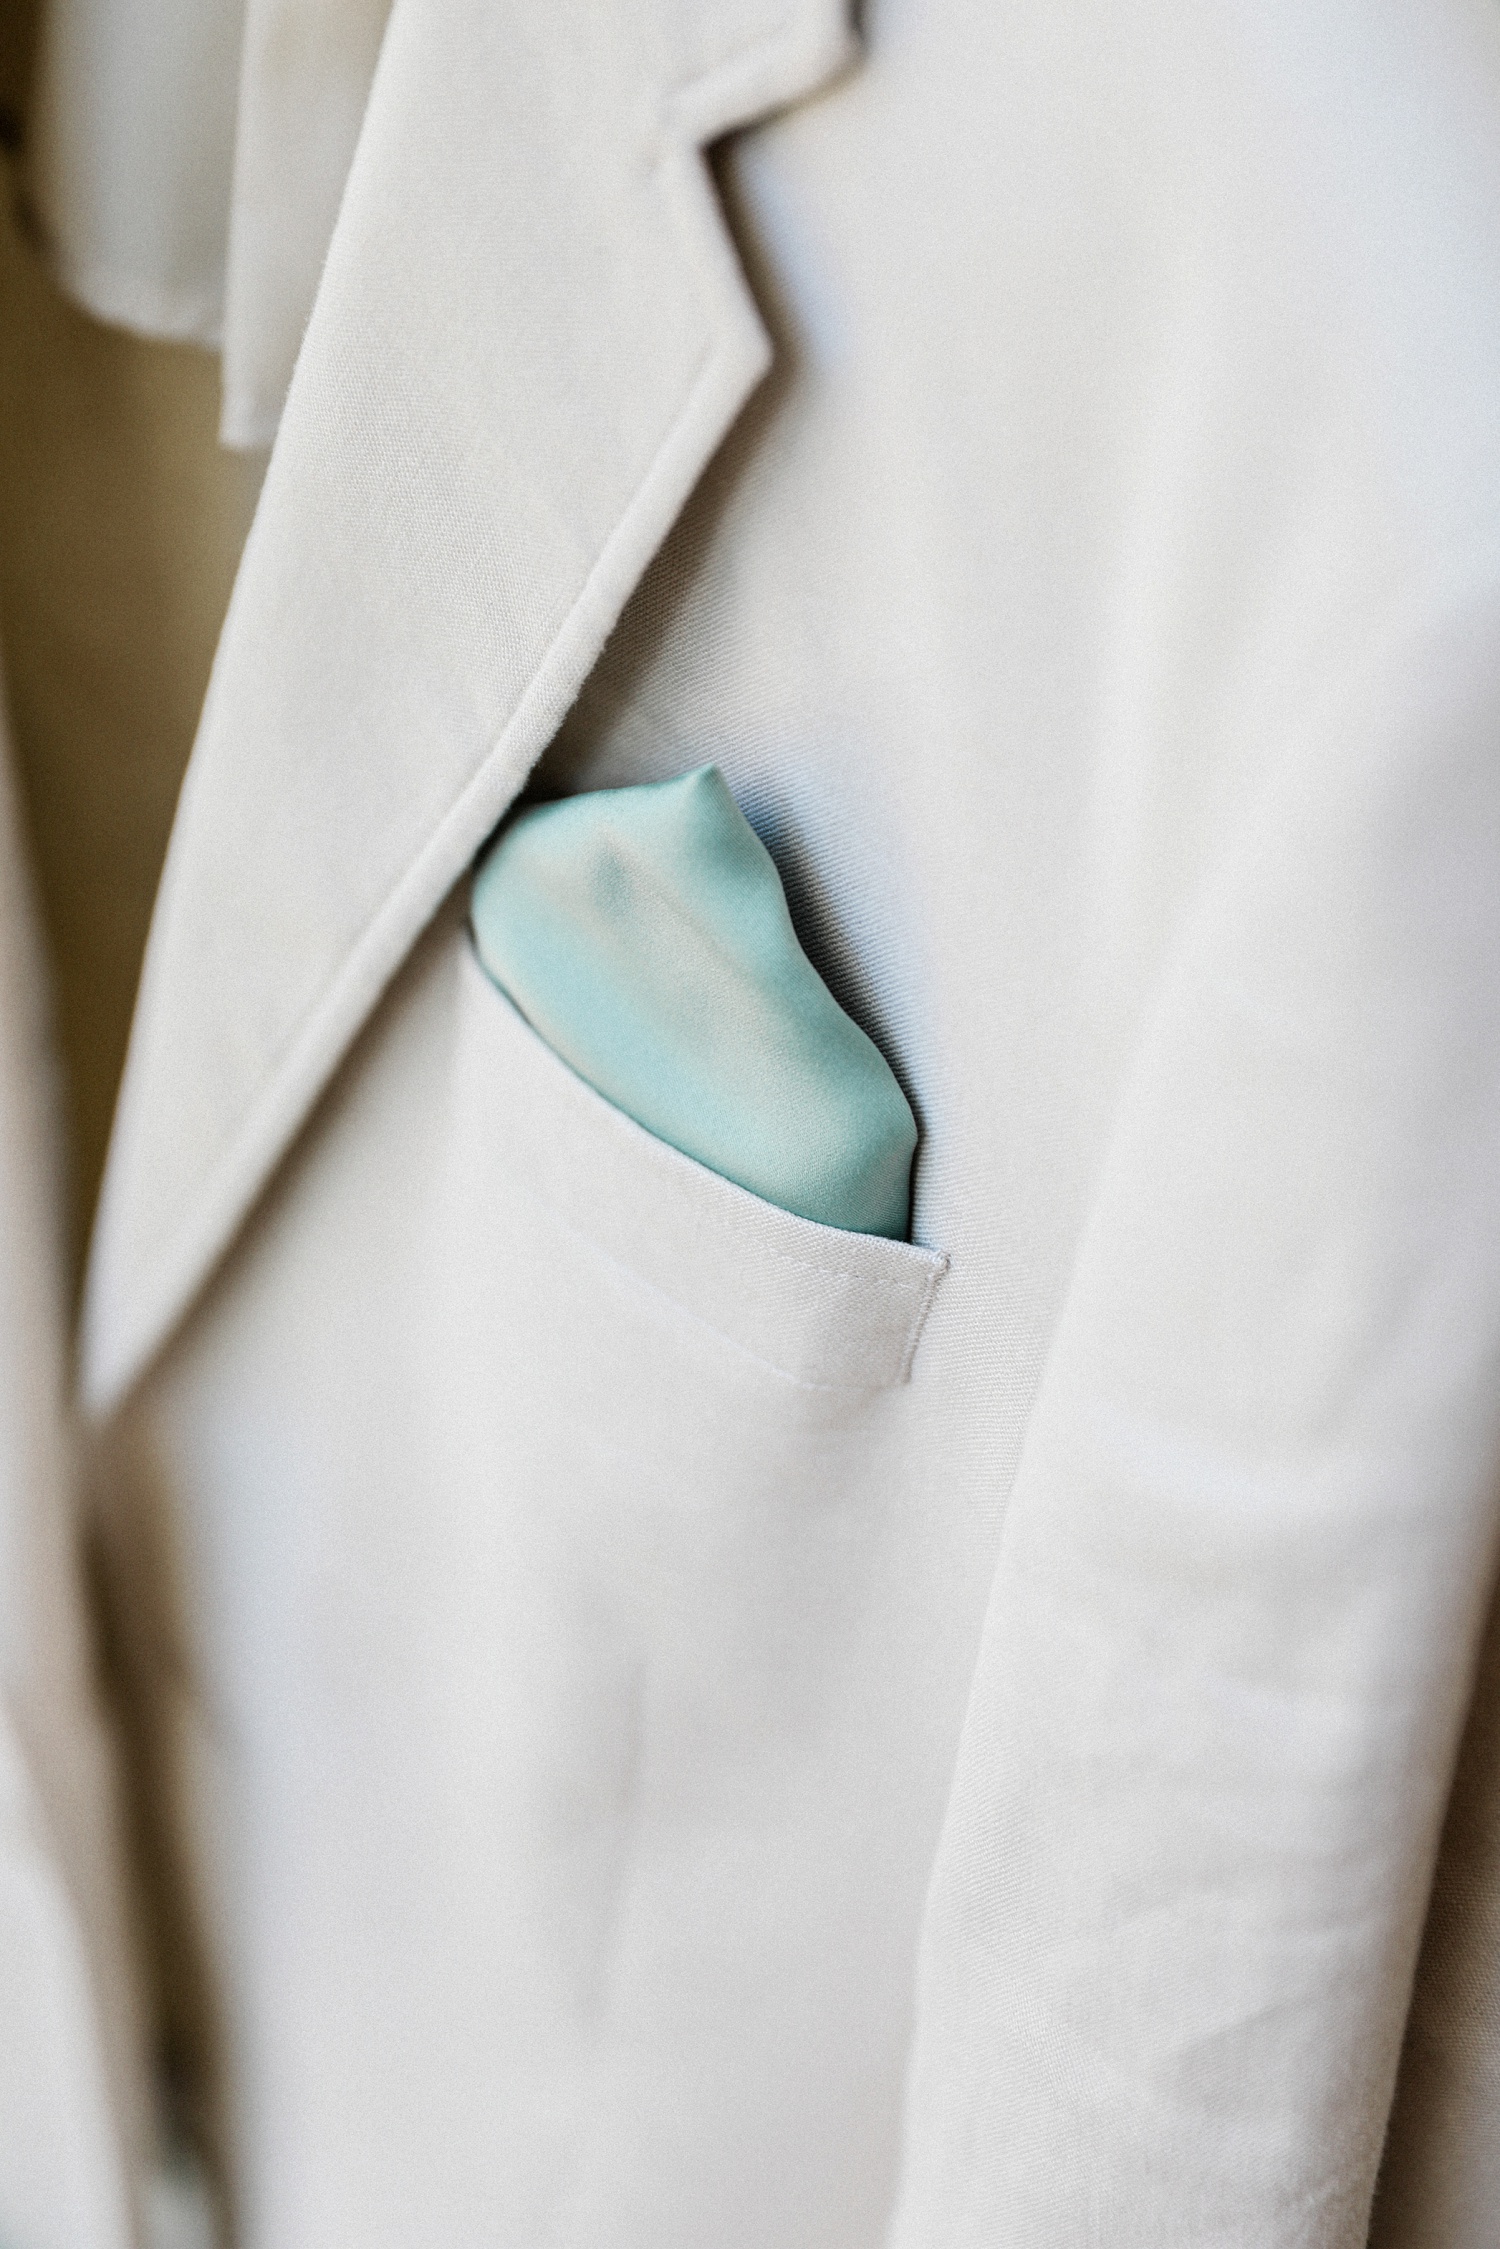 Grooms sage green pocket square in his stone coloured jacket